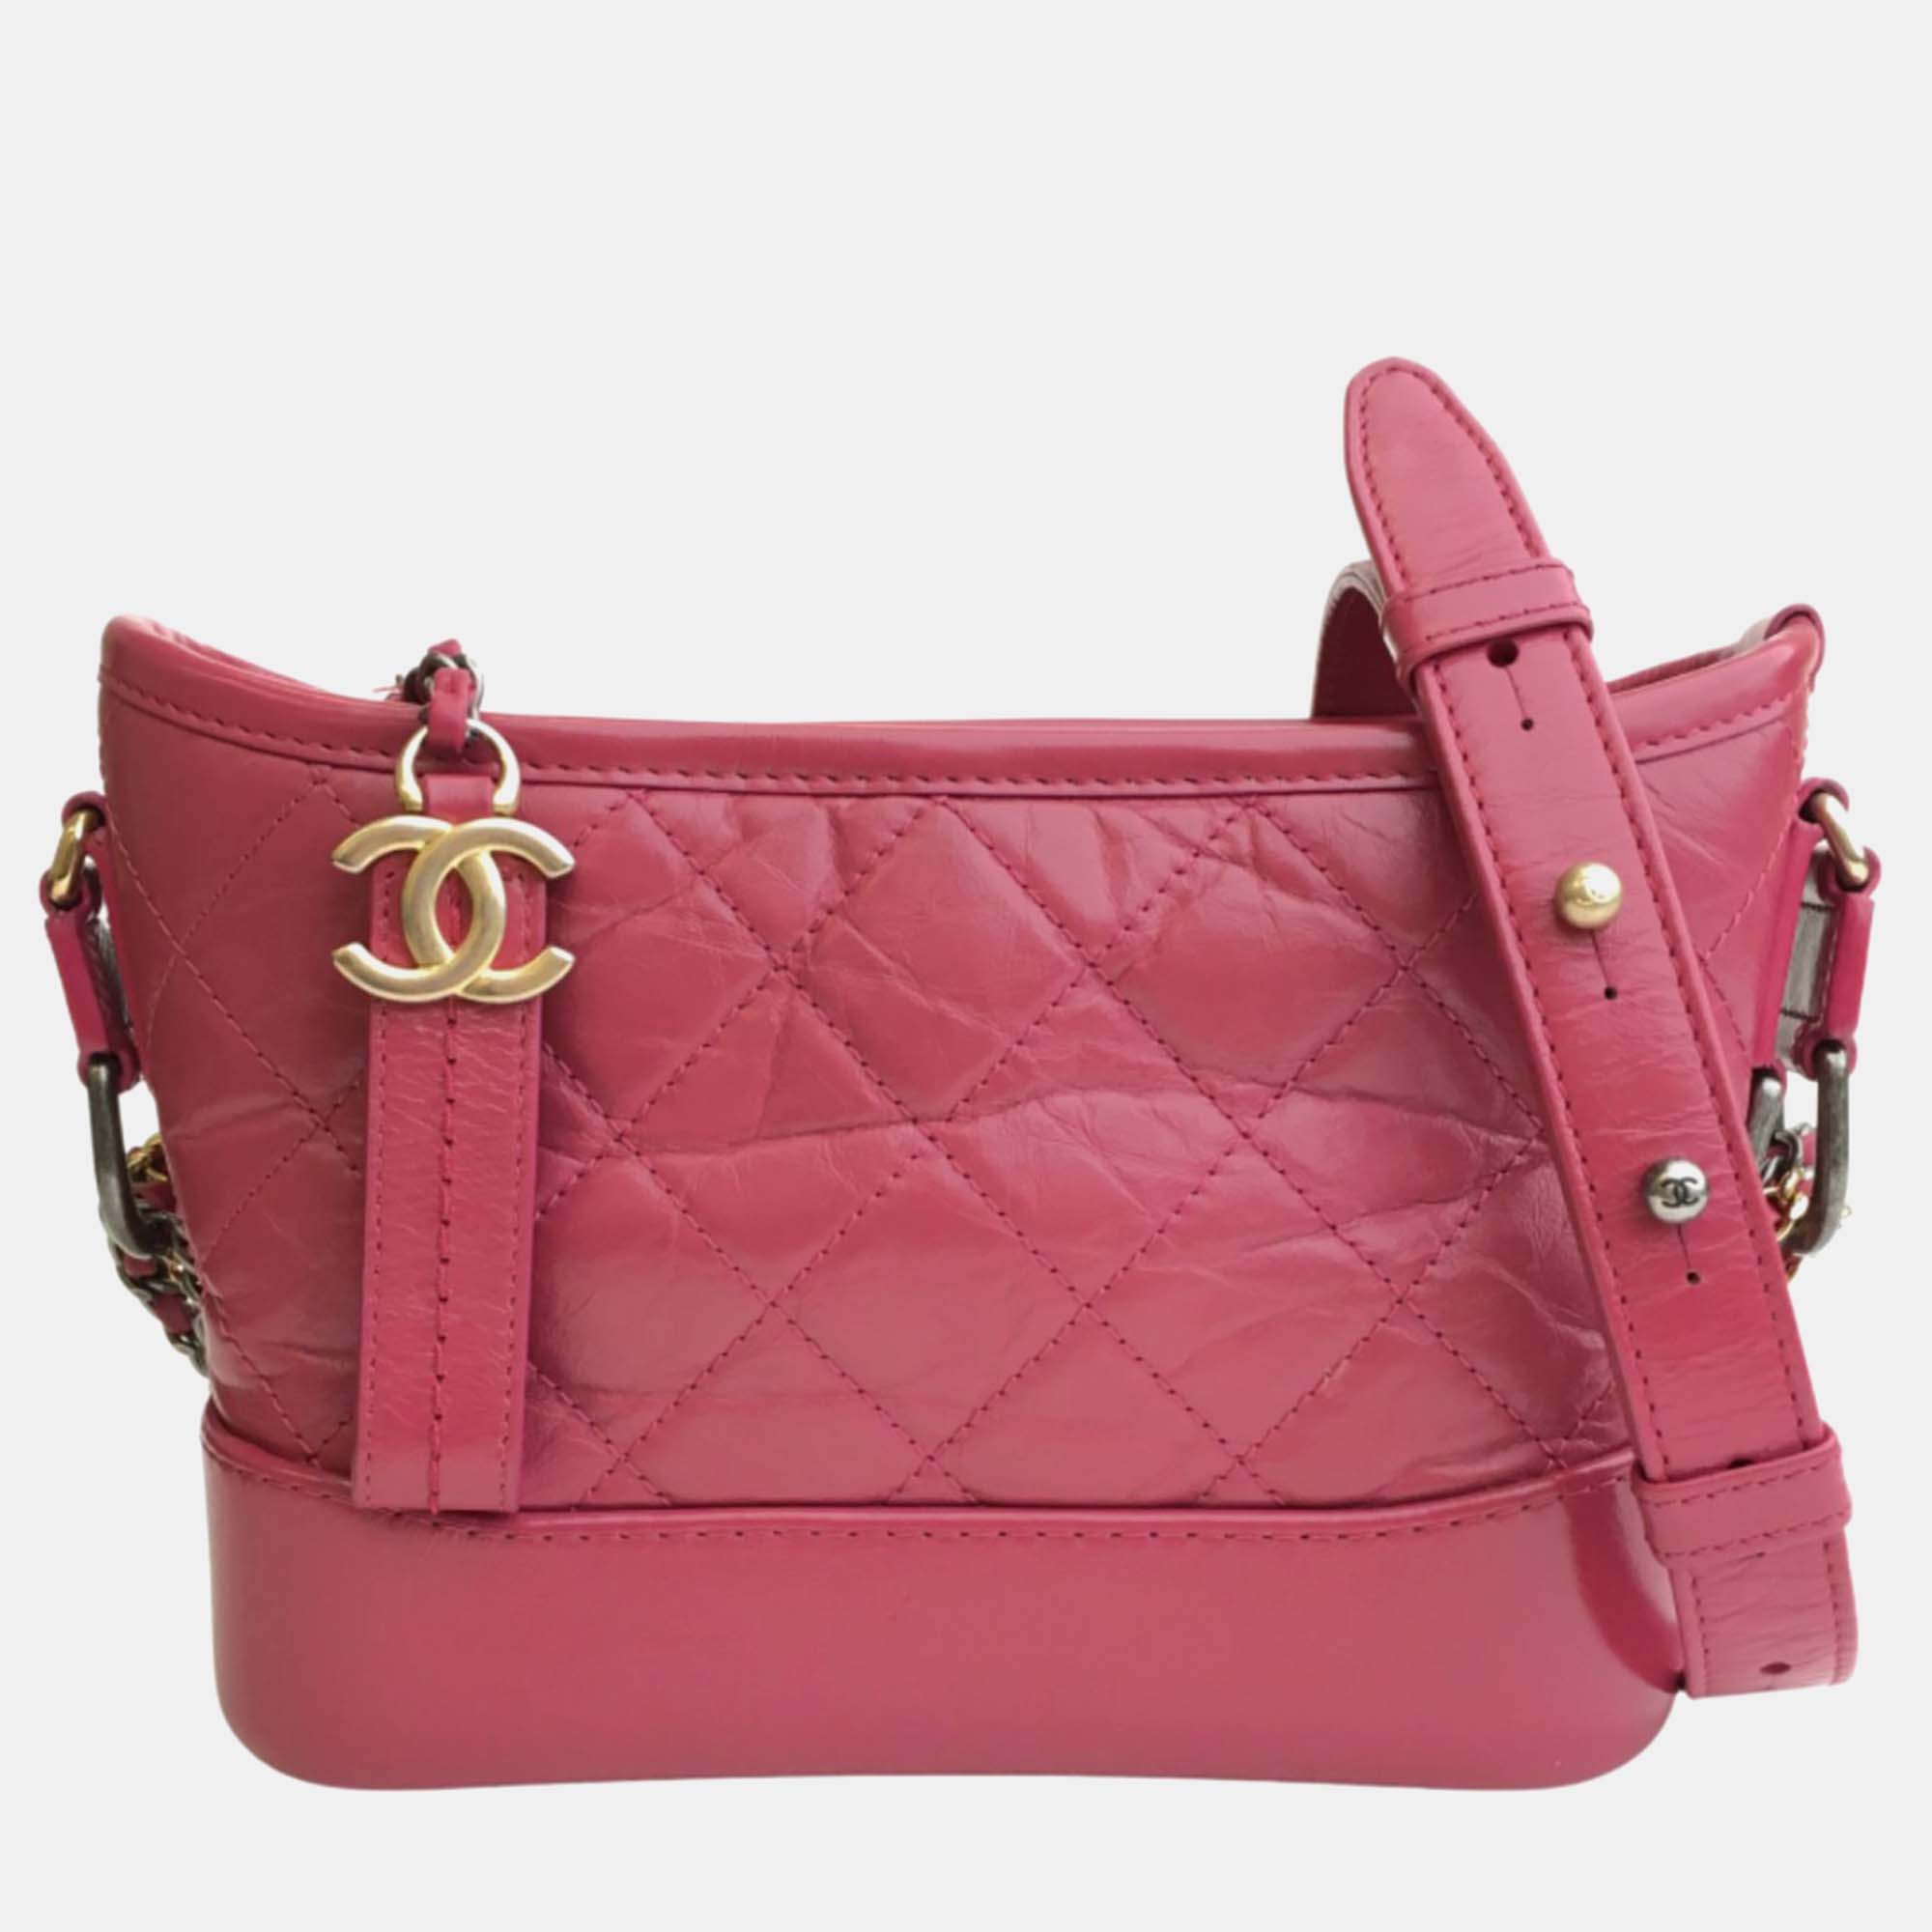 Chanel pink leather small gabrielle shoulder bags